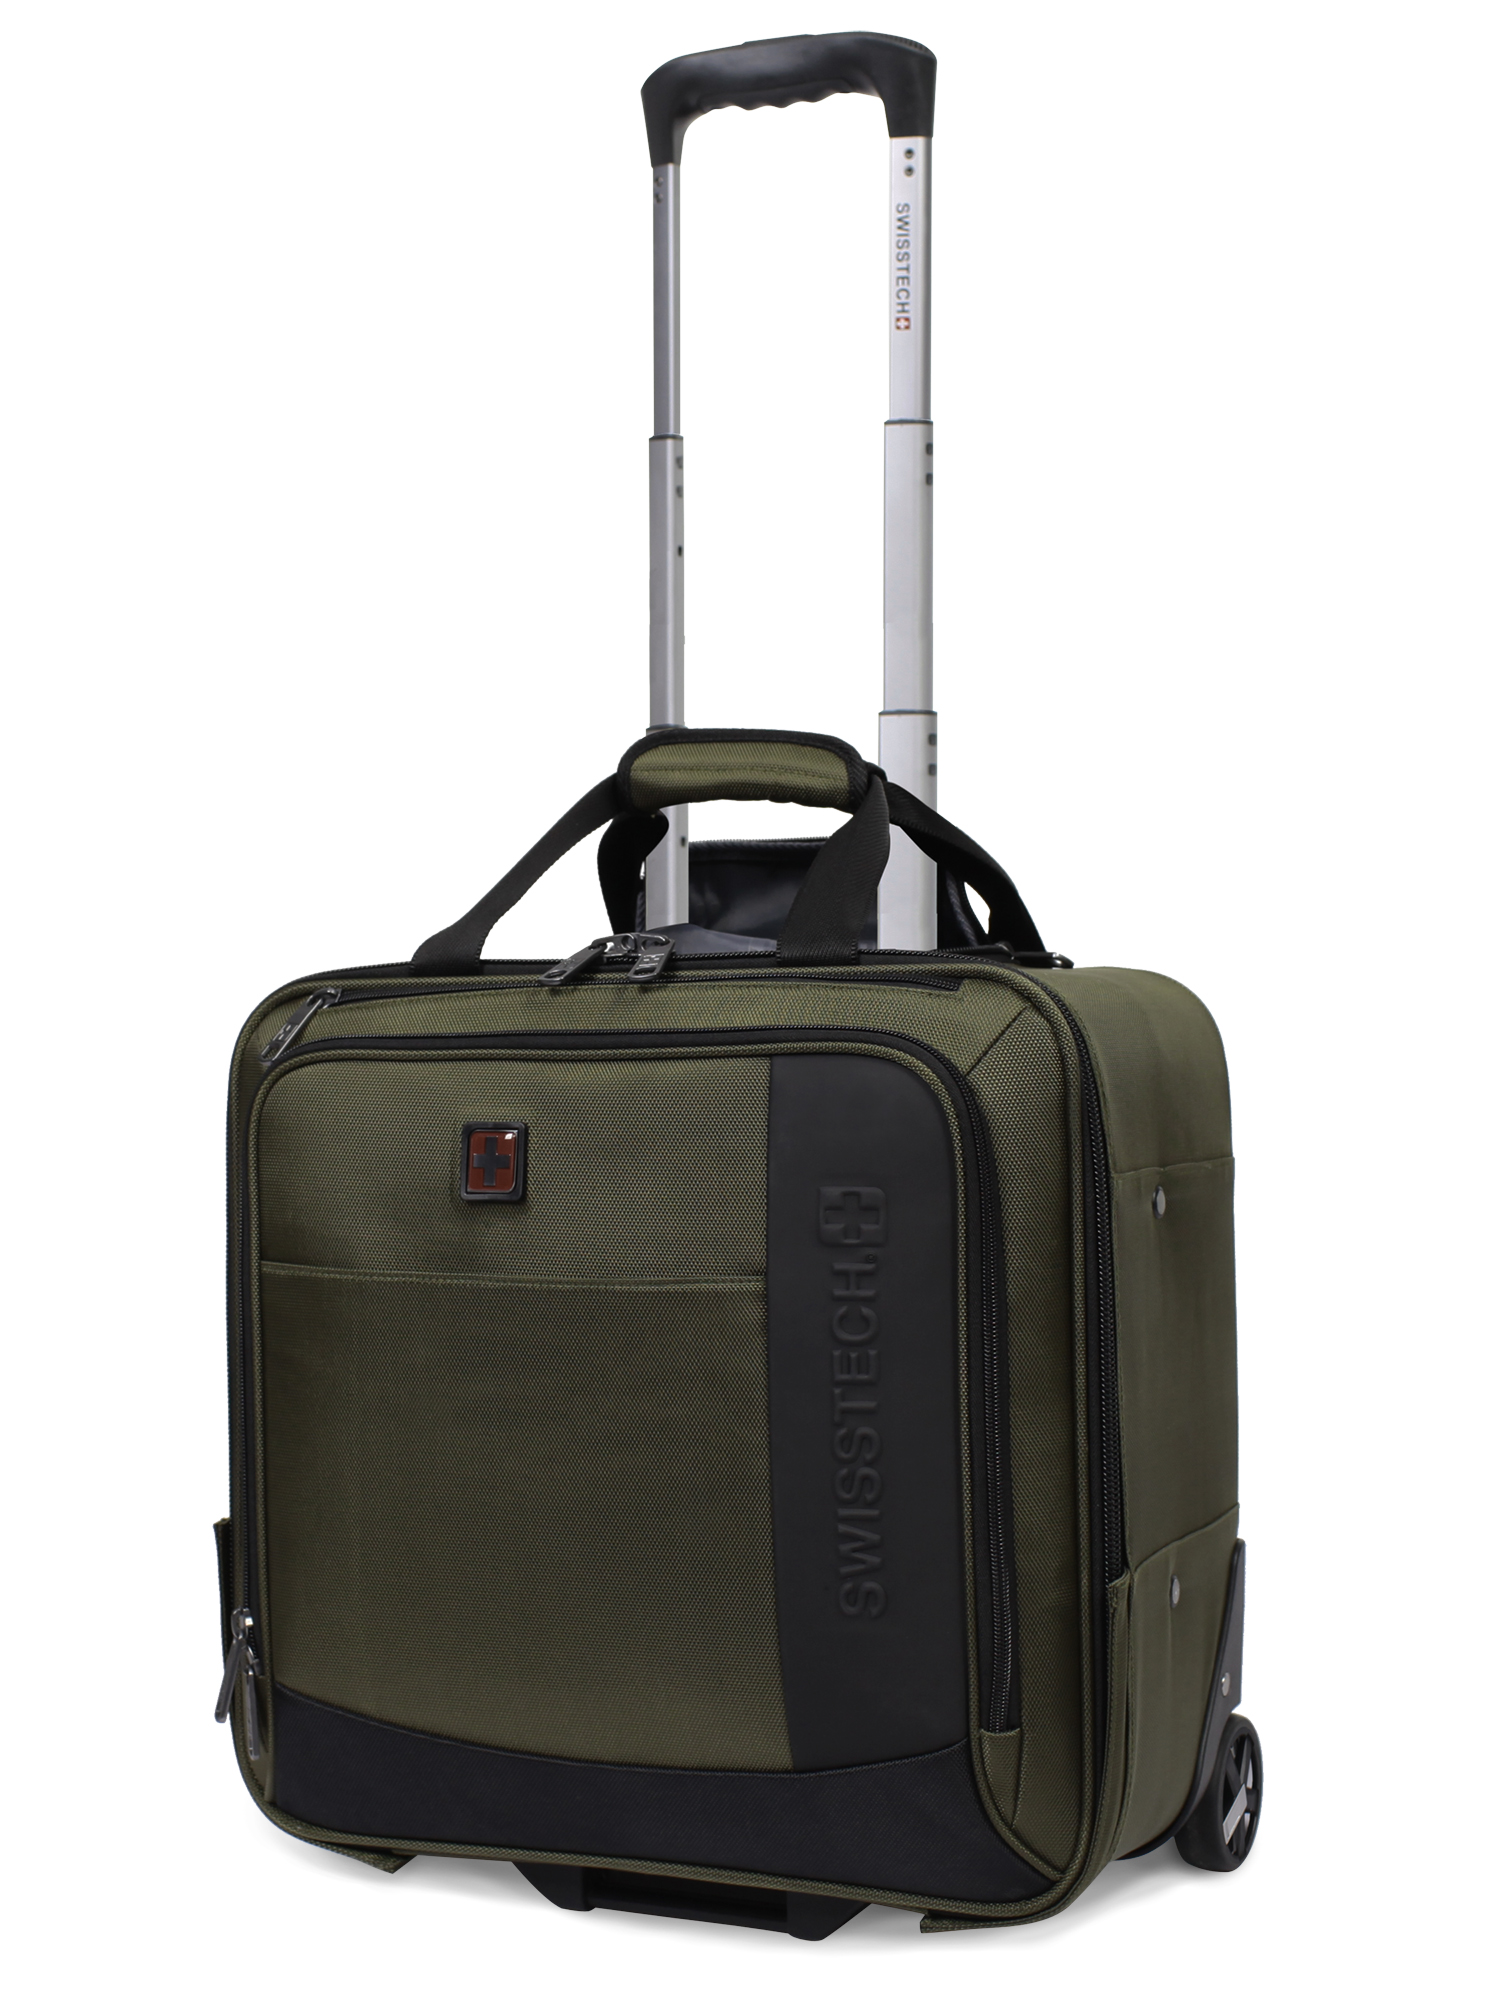 SwissTech Urban Trek 16.5" Under-seater Carry On Luggage, Olive (Walmart Exclusive) - image 1 of 12